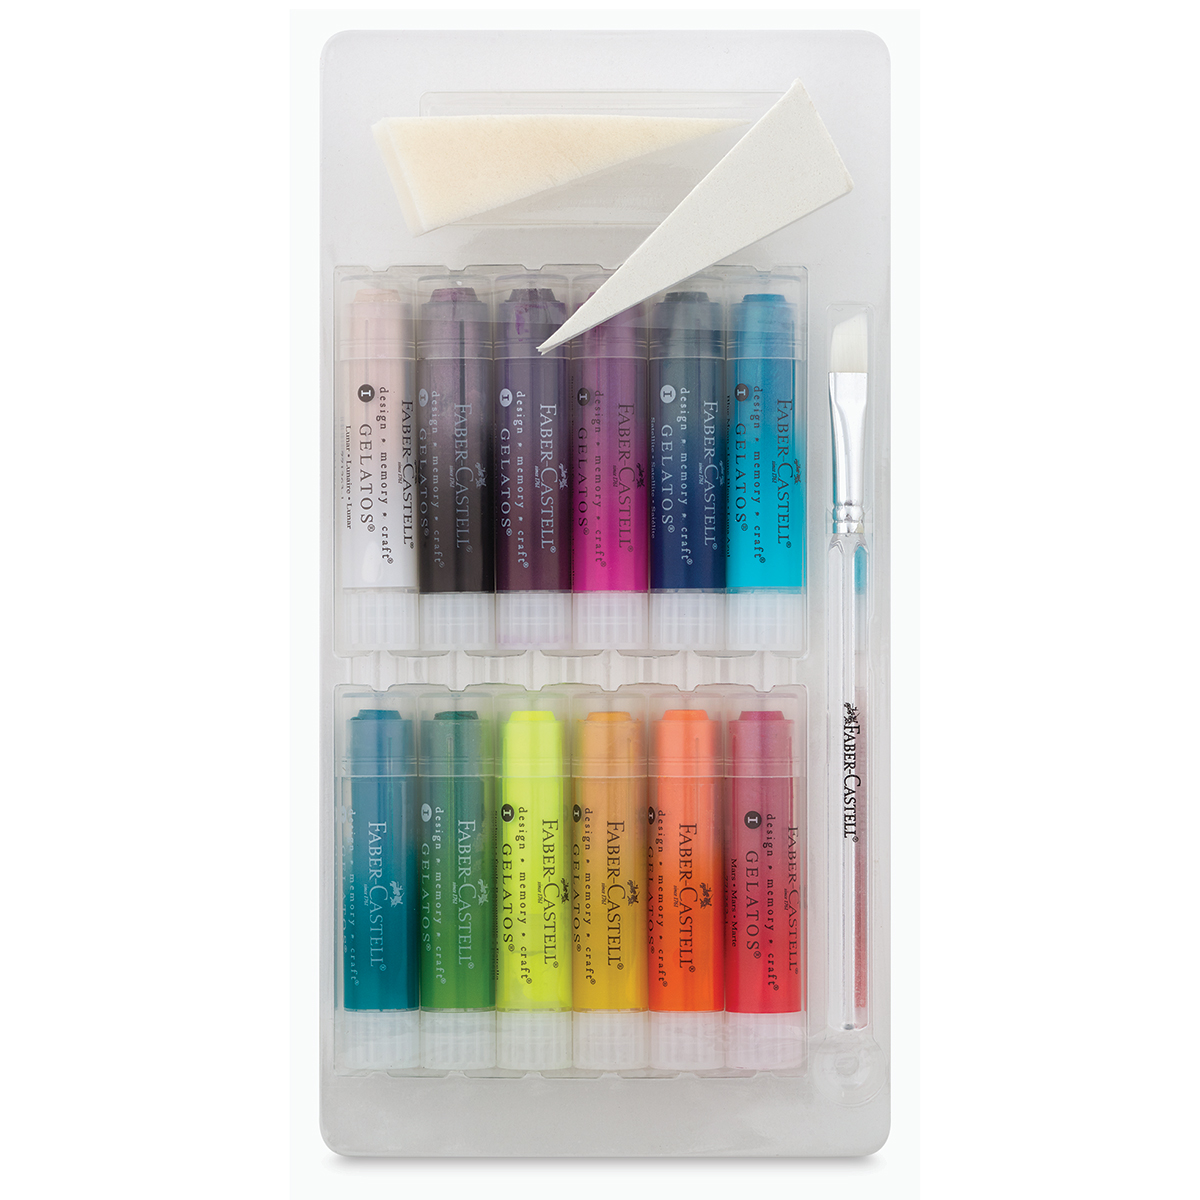 Gelatos water-soluble crayons, gift set, 33 pieces